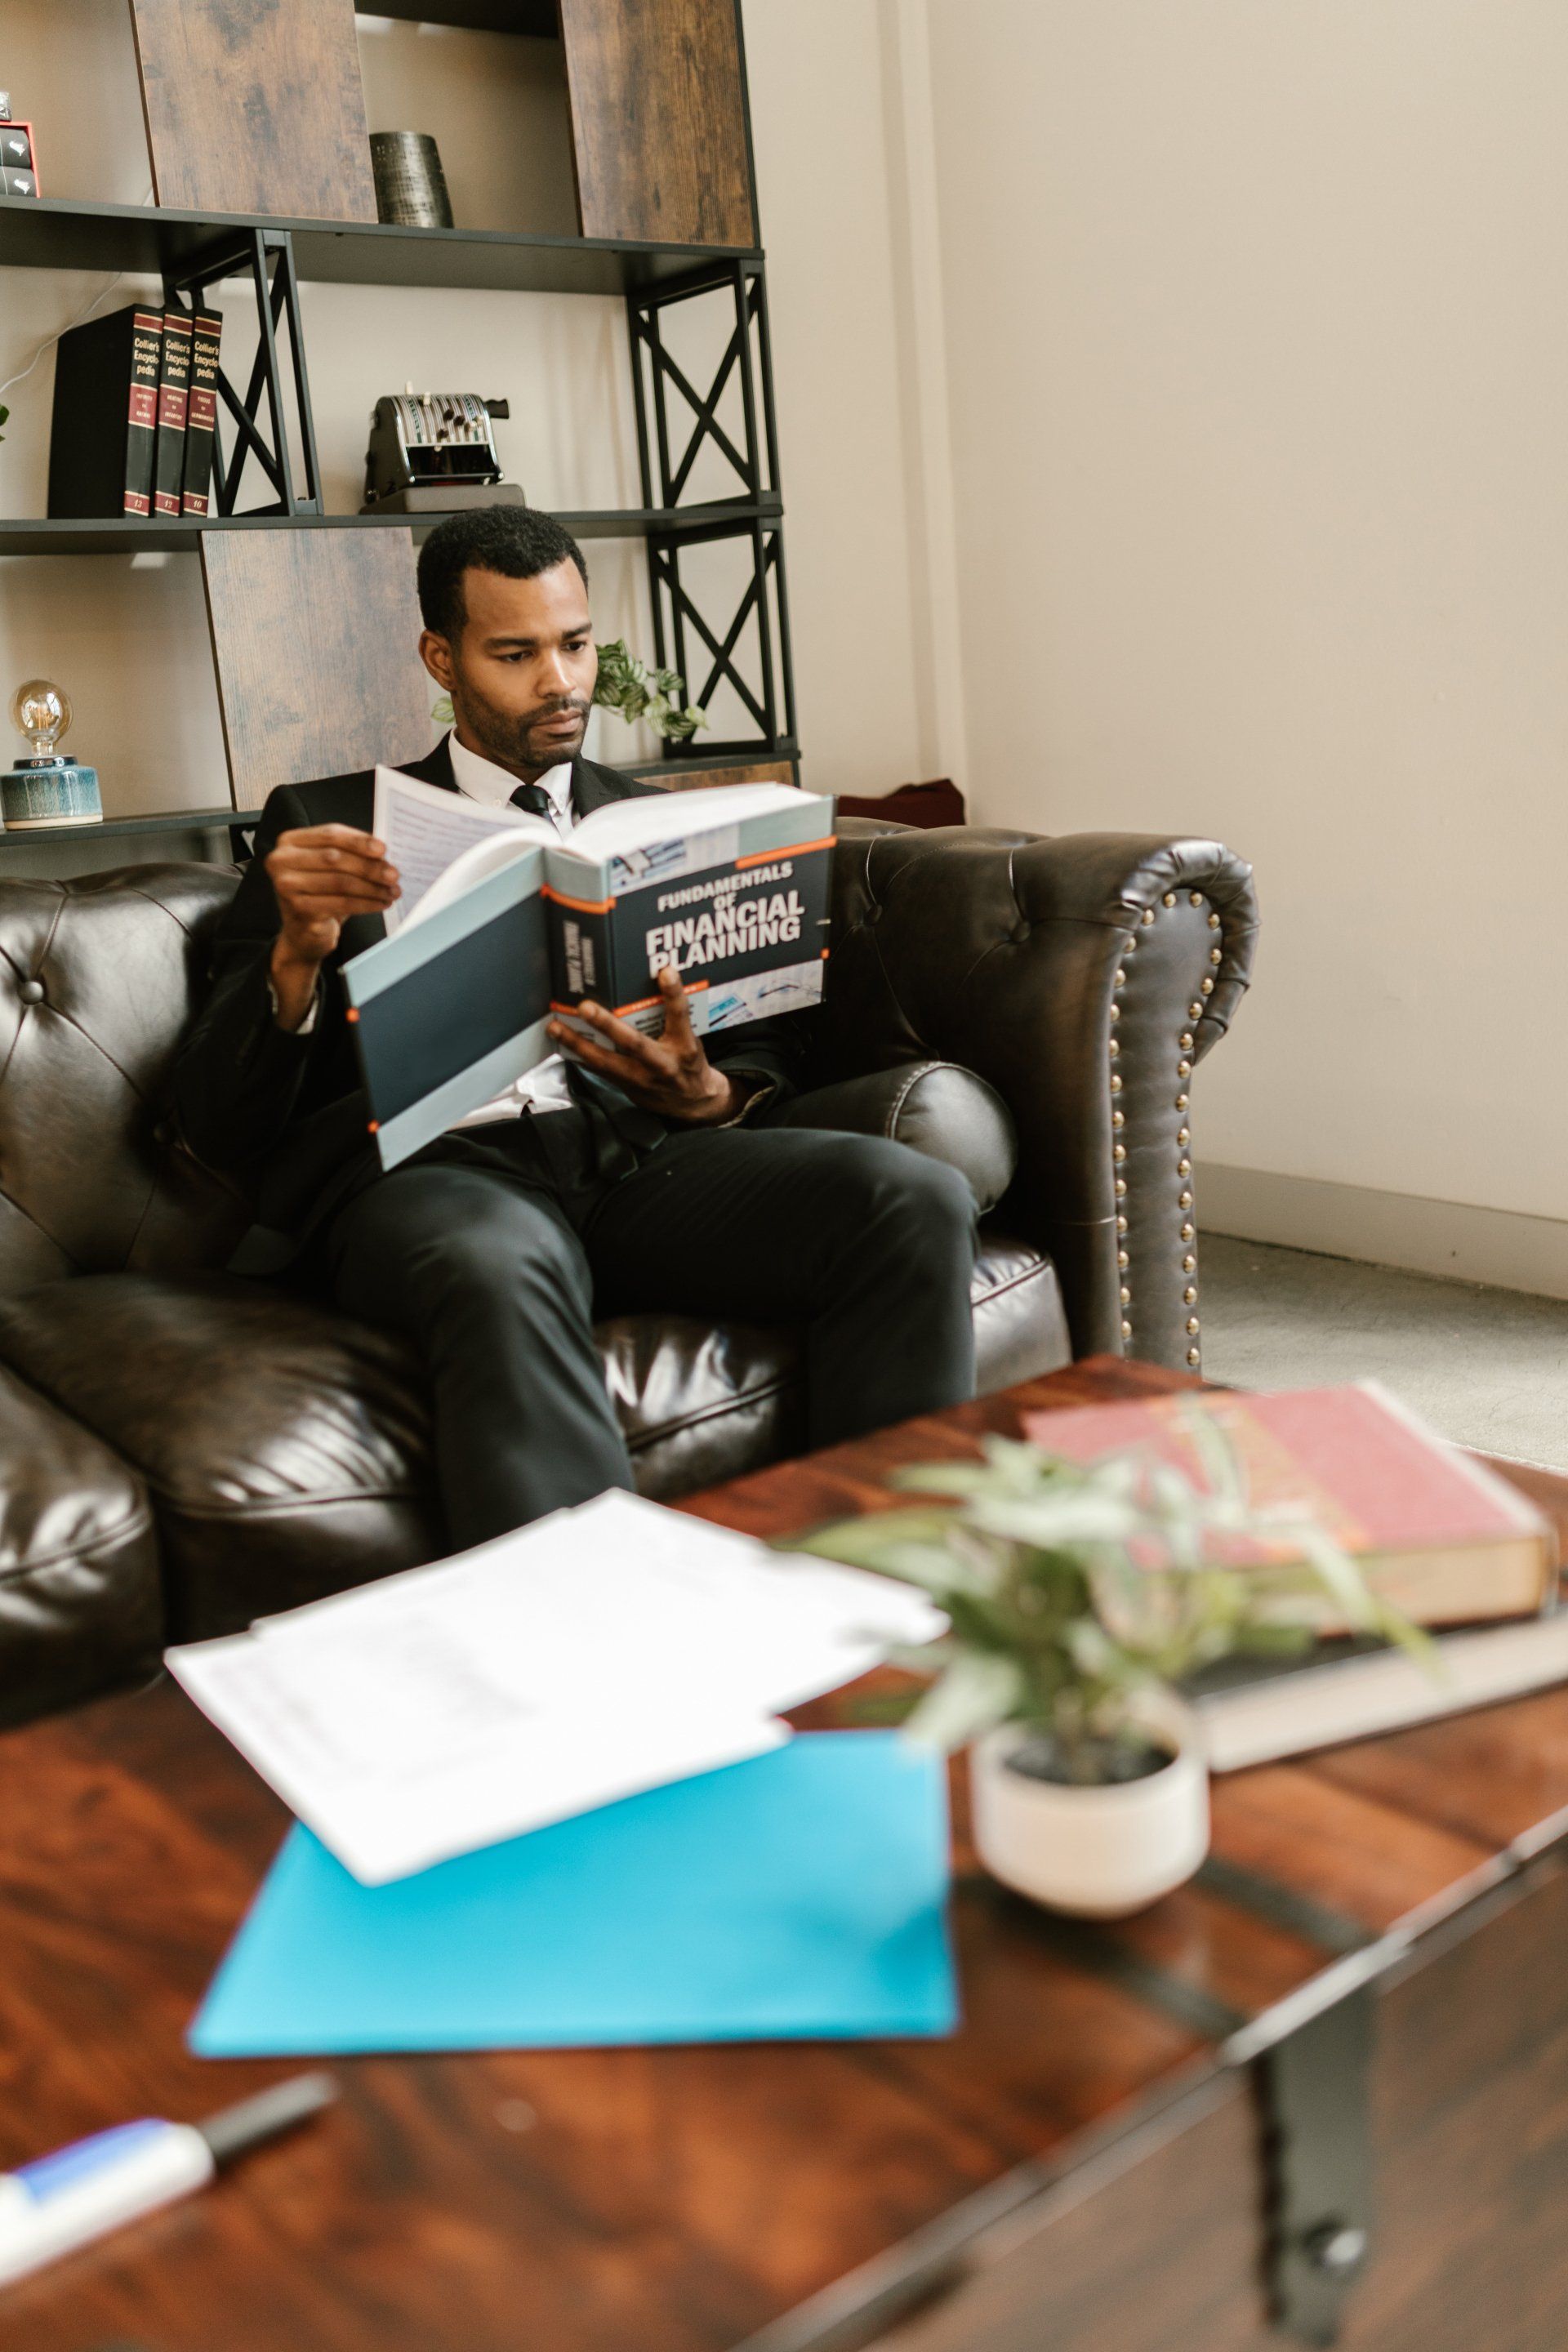 Man sat on sofa reading a book - Employee Wellbeing & Benefits